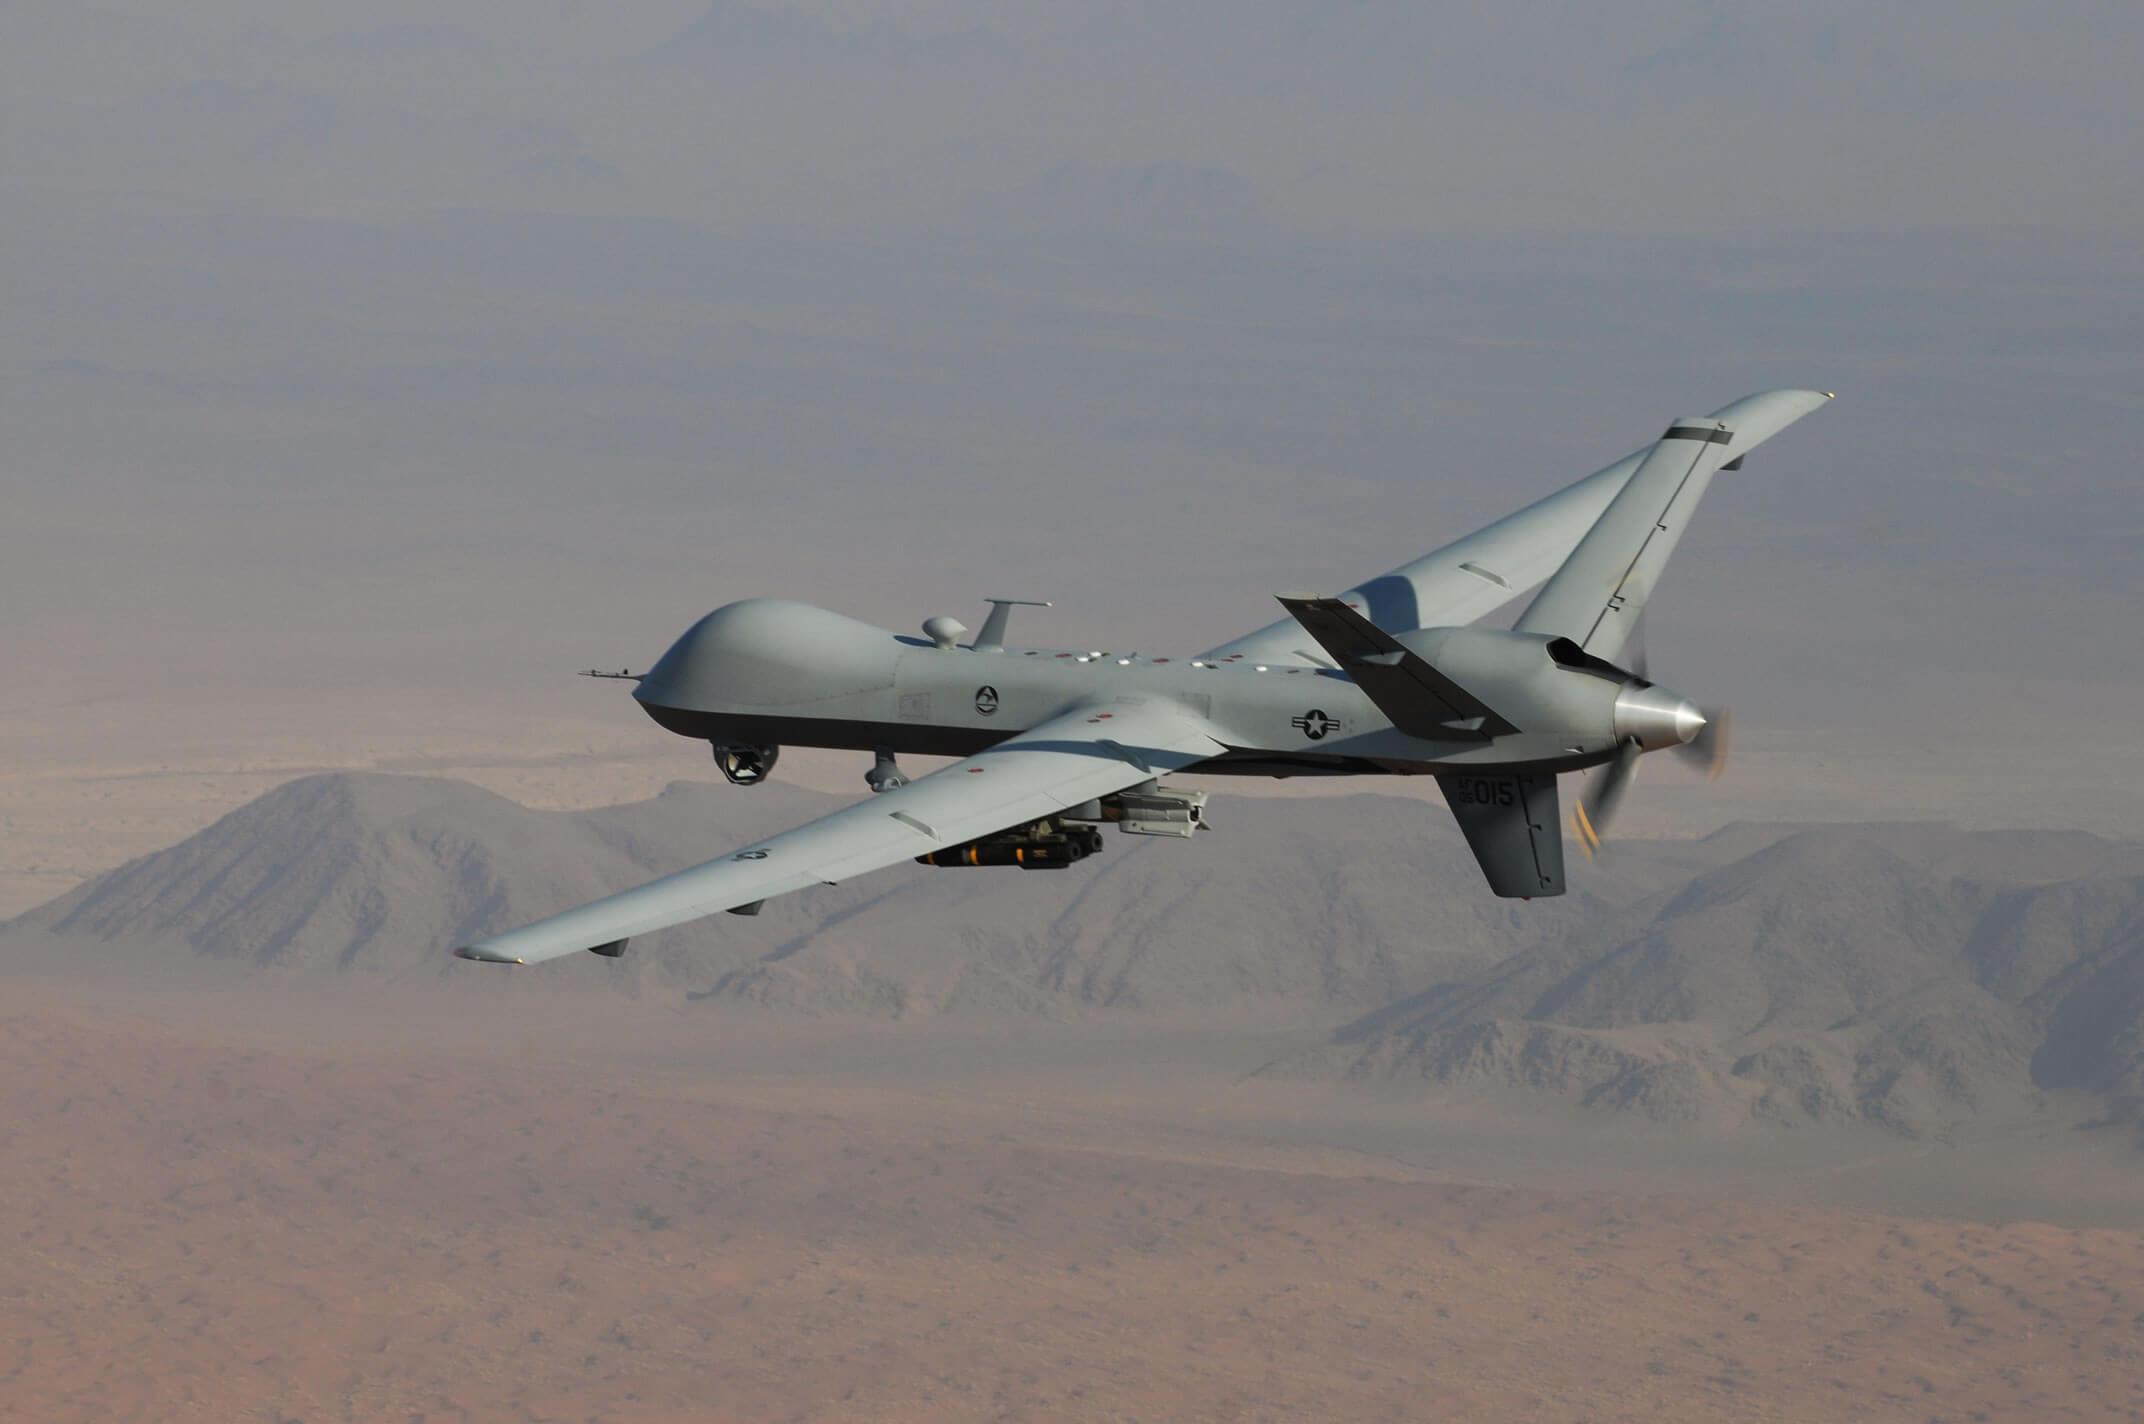 The Pentagon deployed more drones domestically last year than the previous five years combined